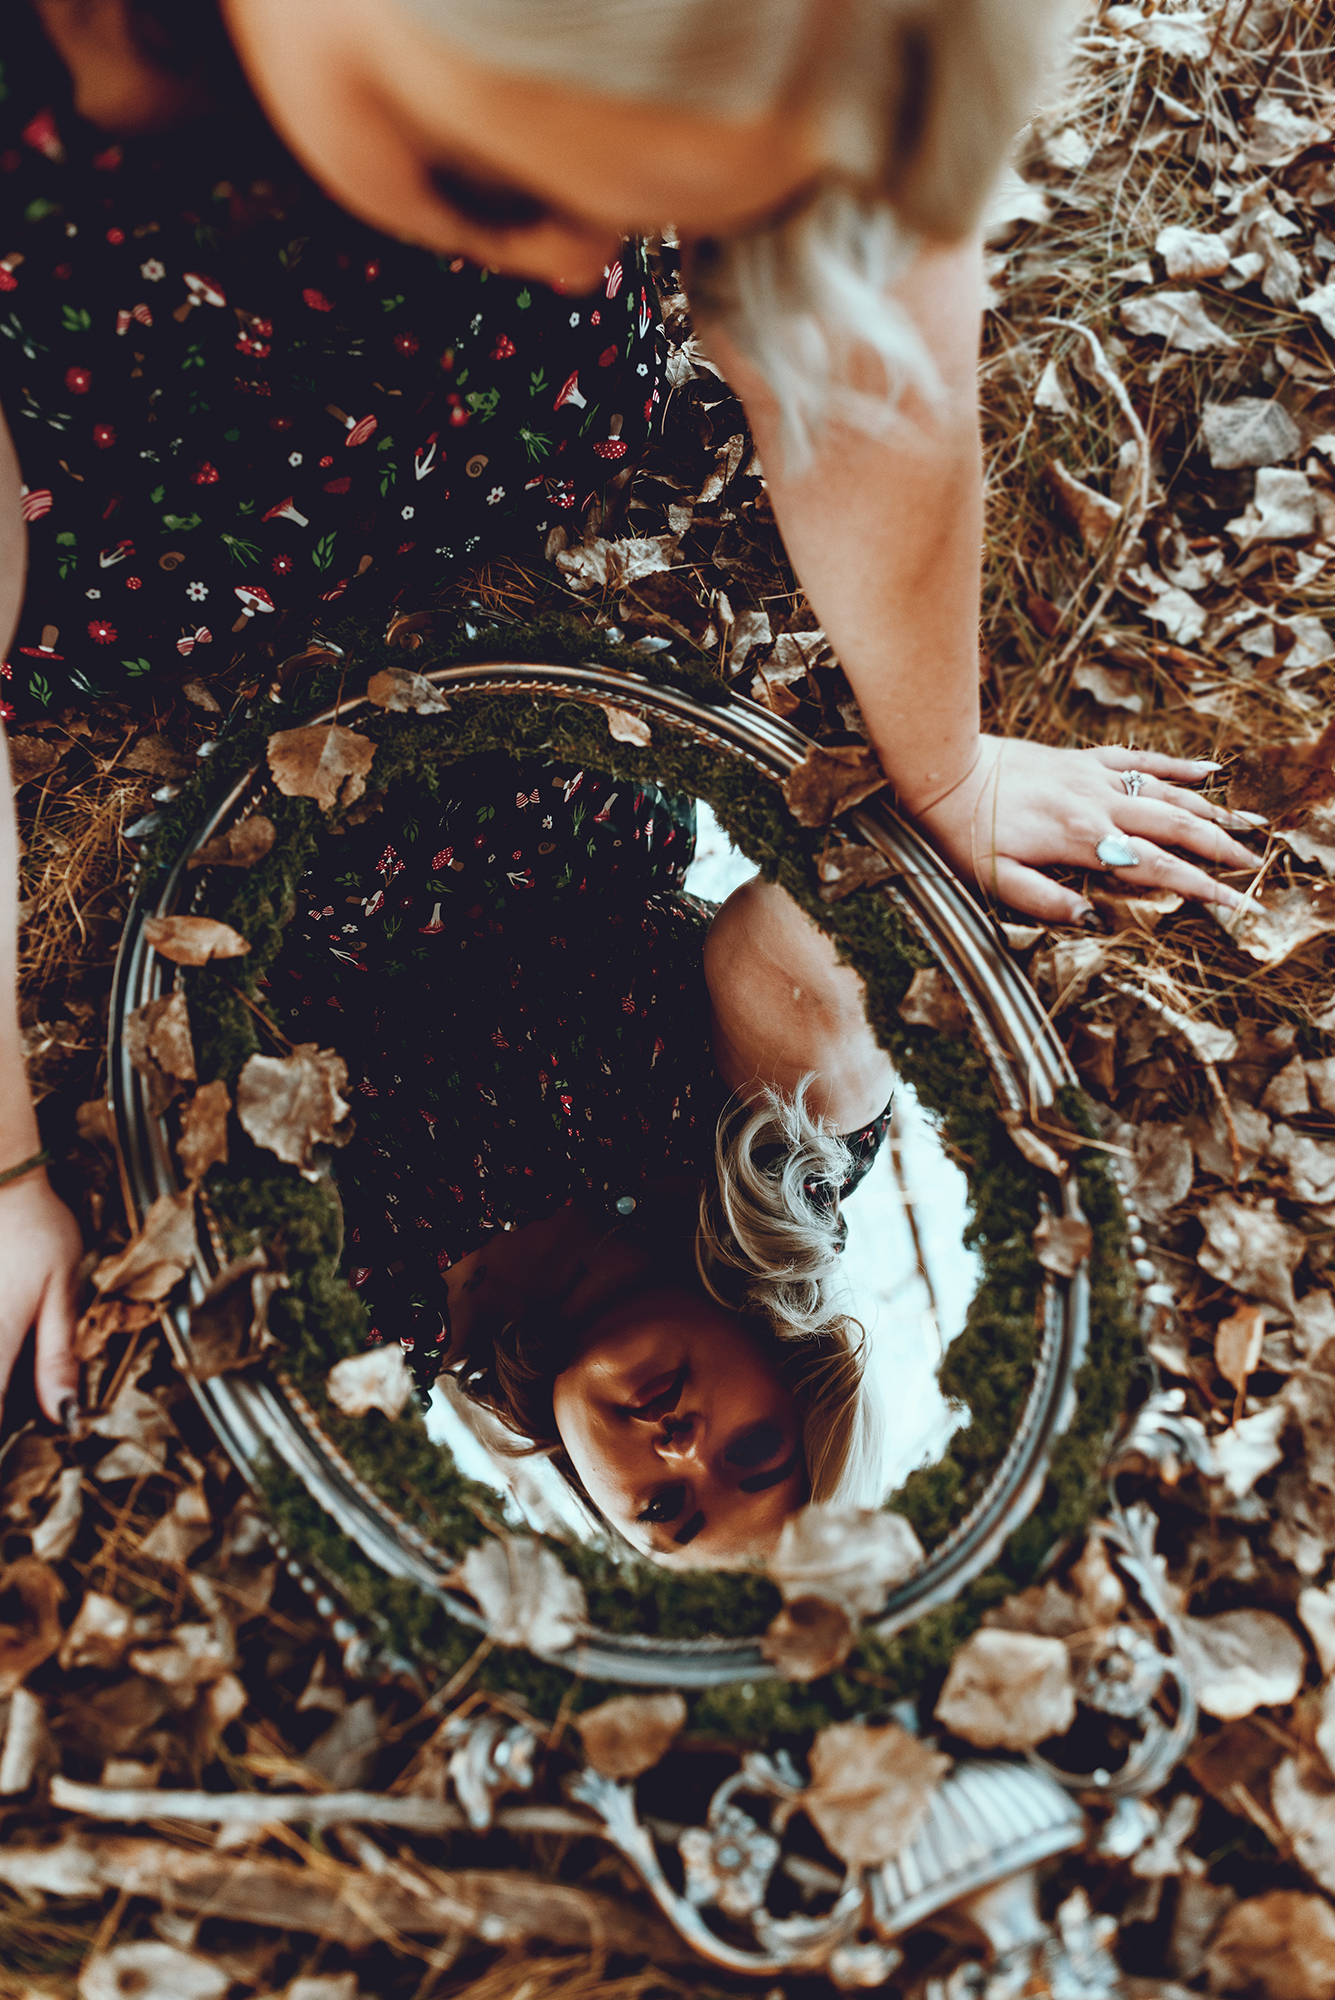 A person’s reflection in a round mirror on the ground, surrounded by dry leaves and twigs. The person is wearing a black dress with white flowers and their face is blurred to protect their privacy. Their hands are visible on either side of the mirror. The background consists of dry leaves and twigs